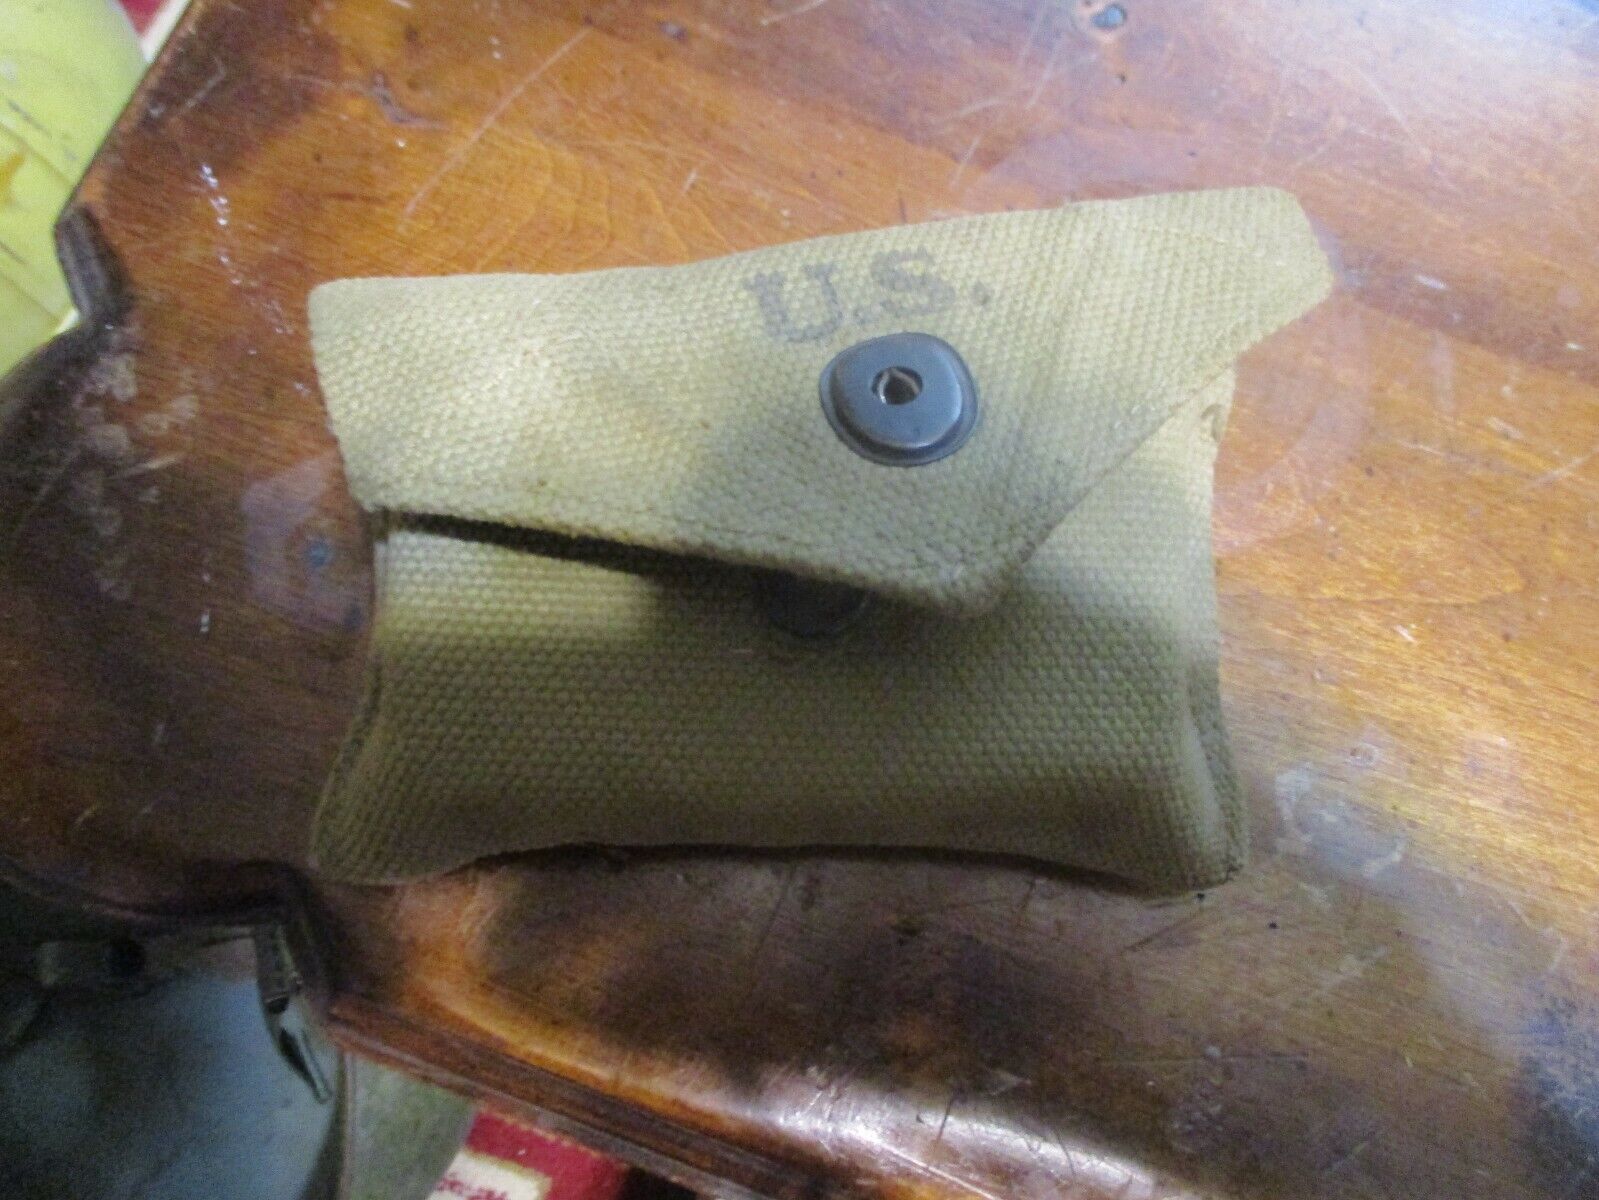 ww2 first aid pouch with bandage